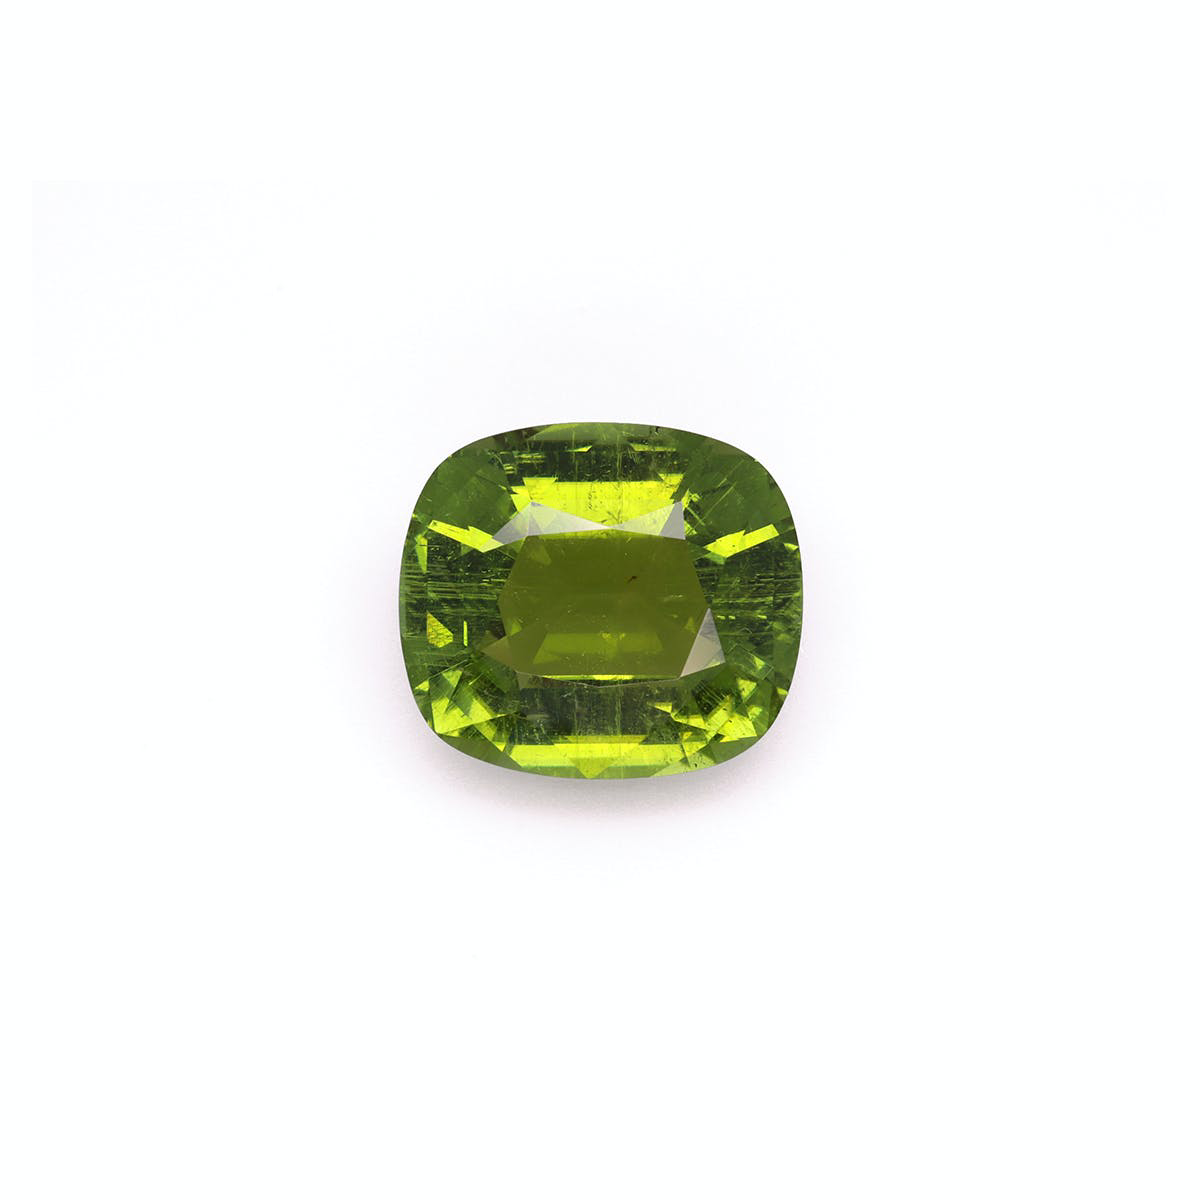 Picture of Lime Green Paraiba Tourmaline 14.89ct - 17x15mm (PA0140)